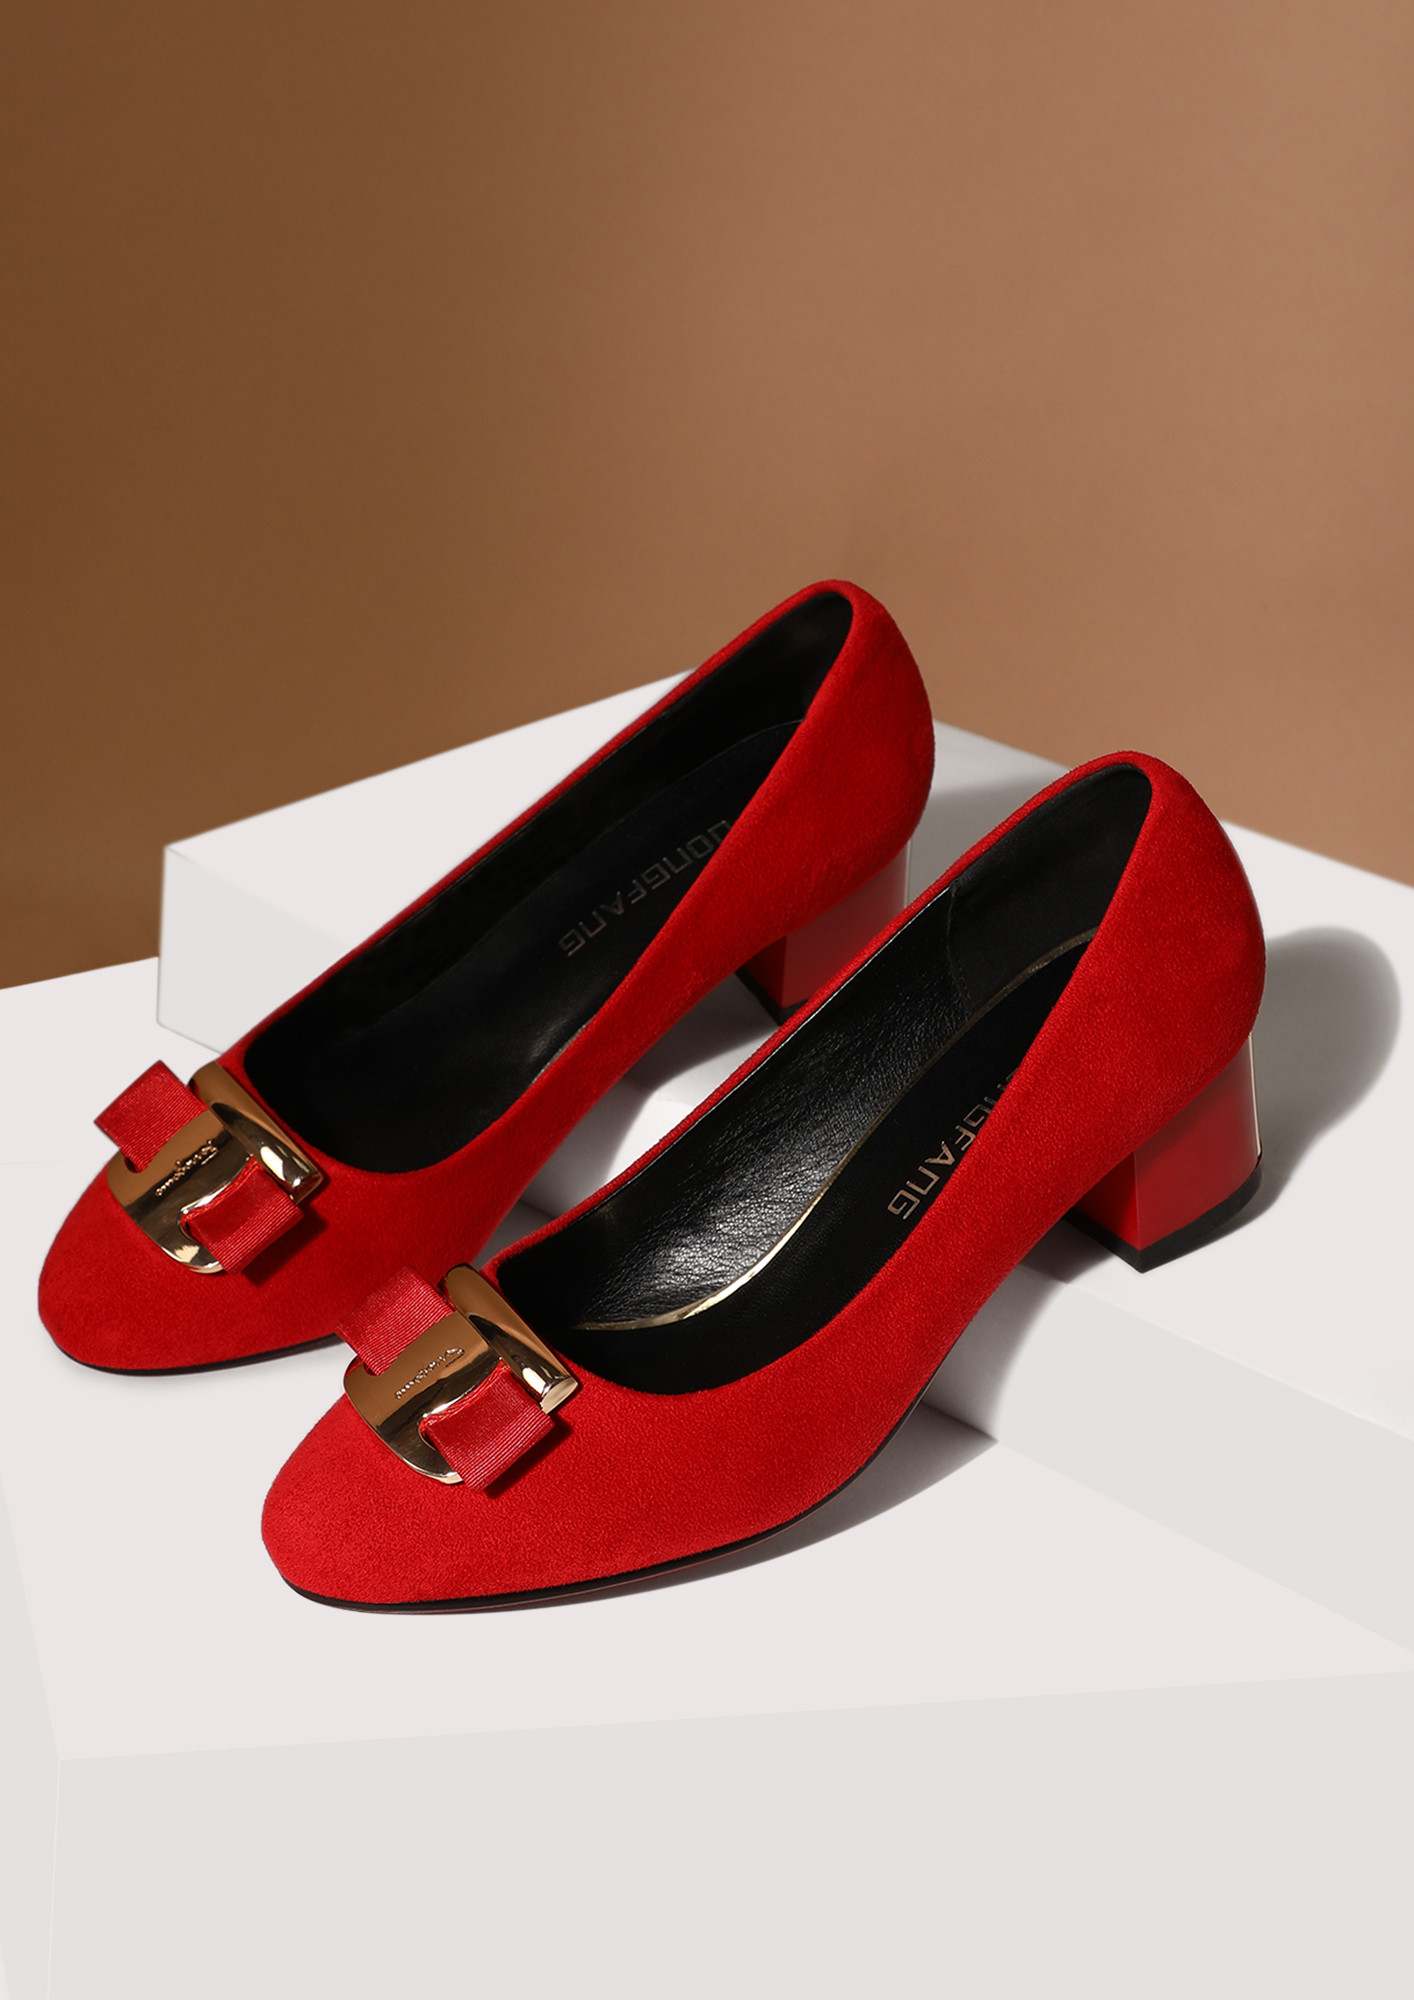 CHICNESS OVERLOAD RED HEELED SHOES